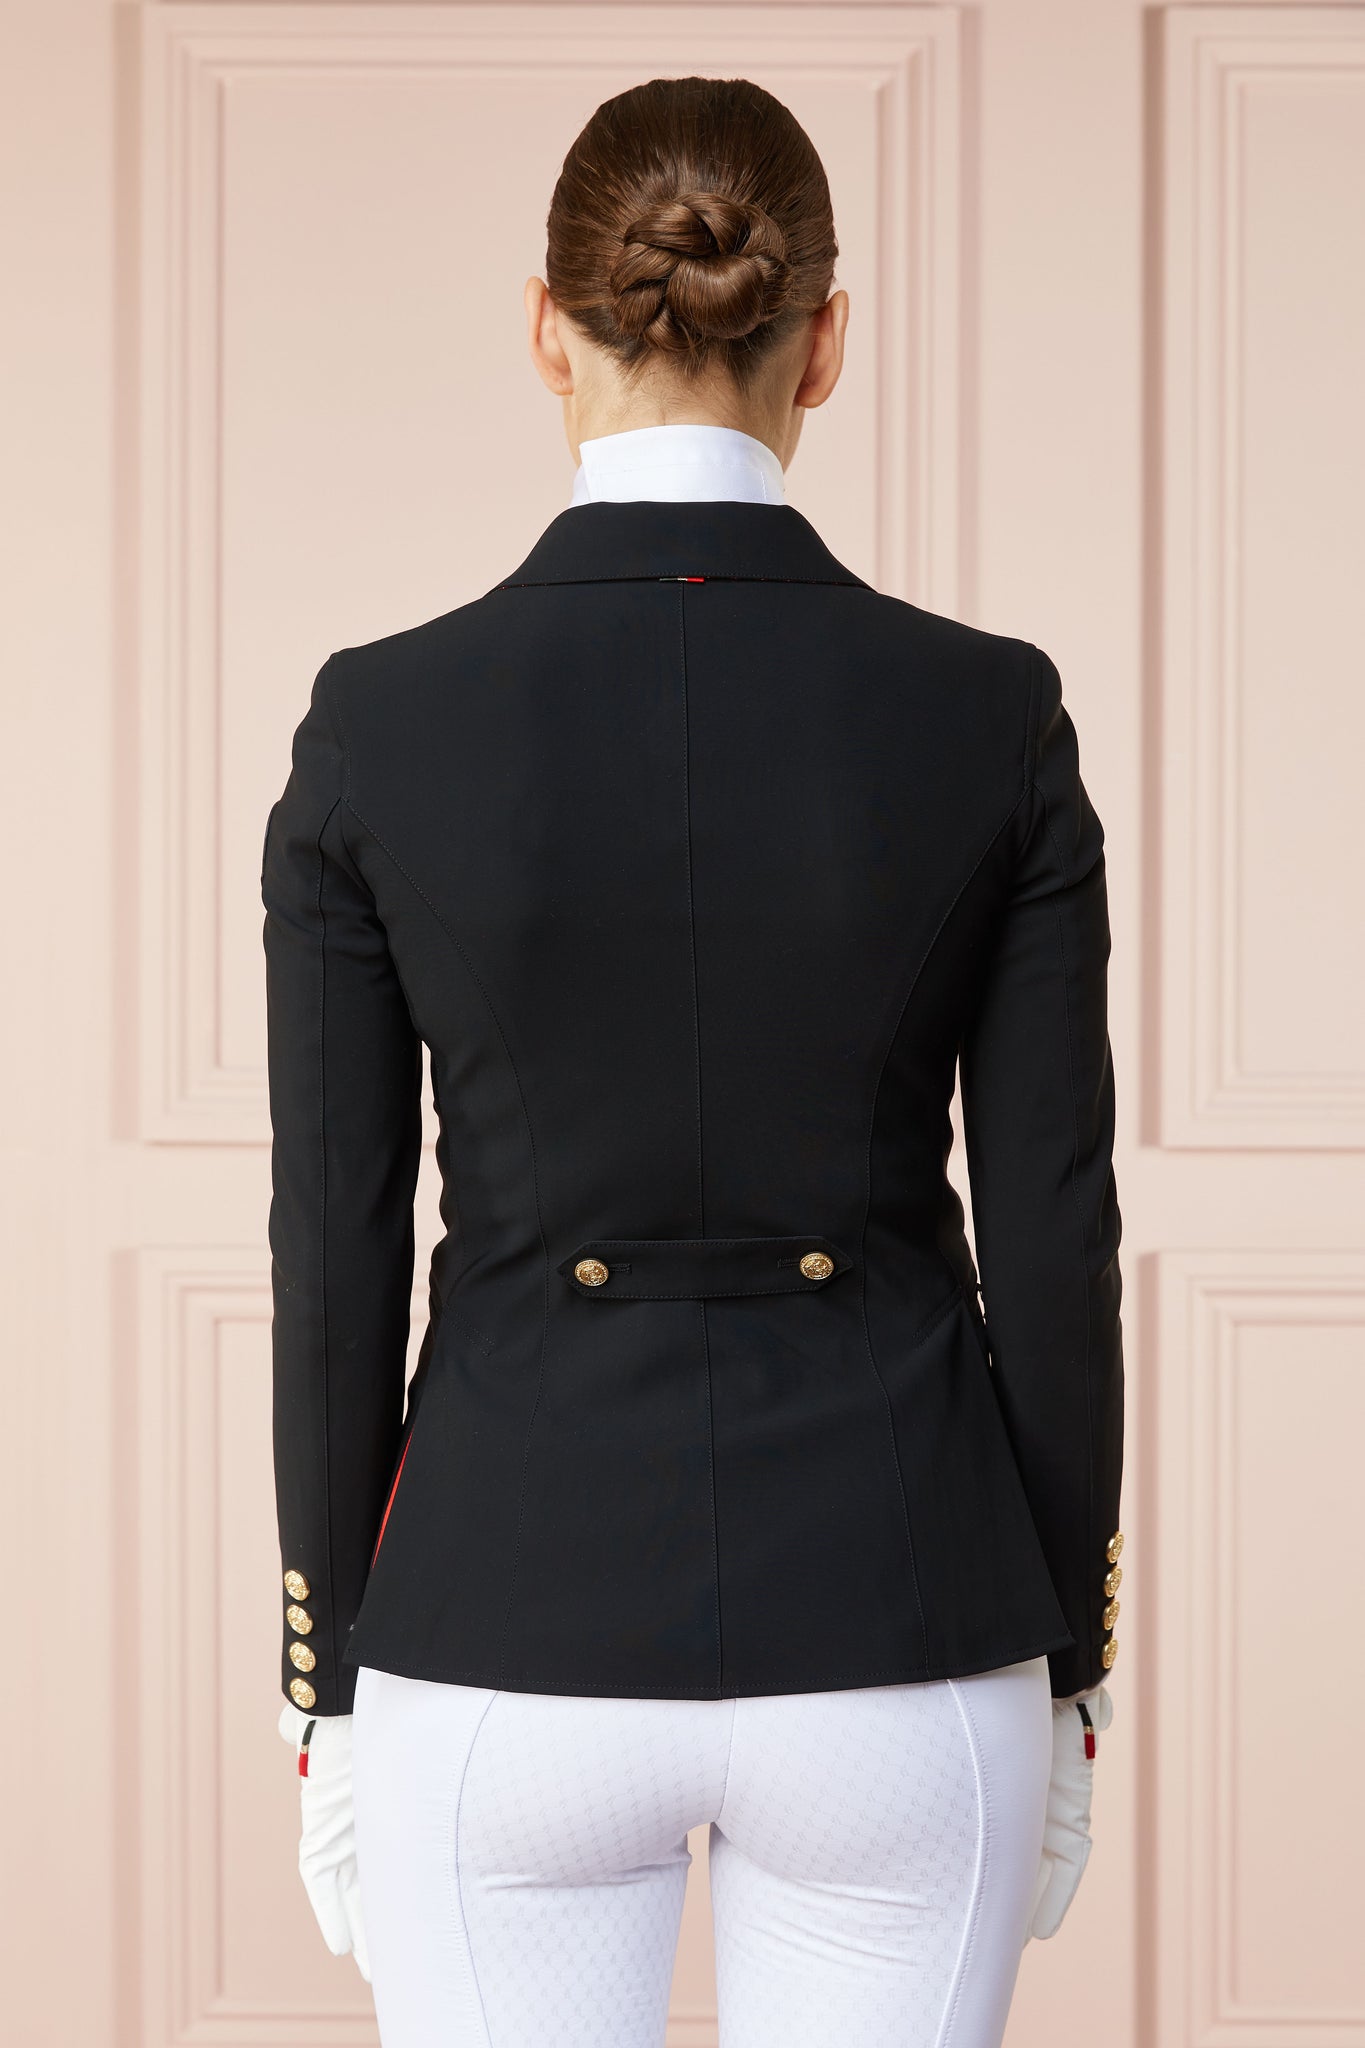 womens competition jacket with gold hardware 